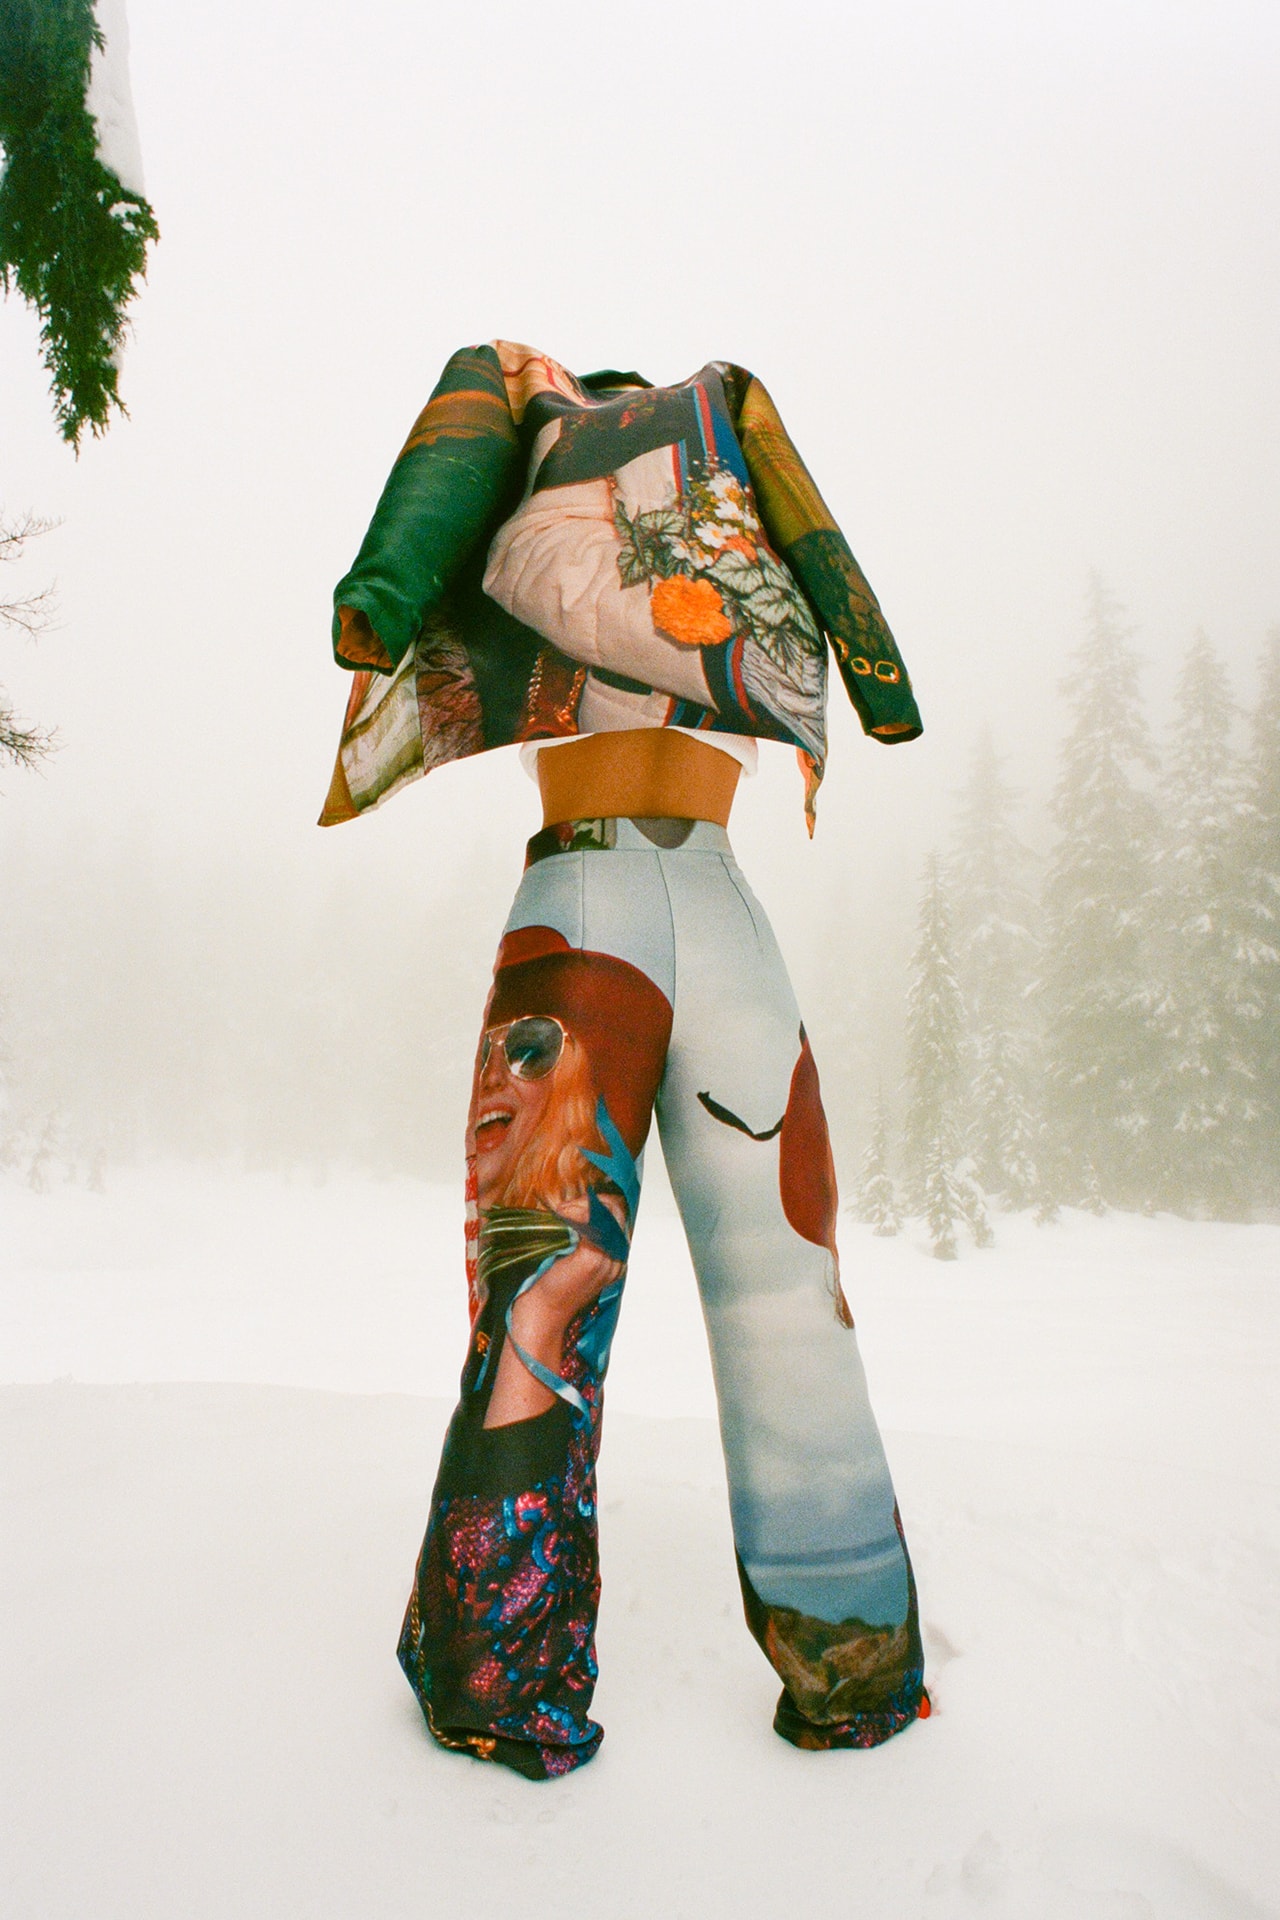 Fyoocher Vancouver Jamie Dawes rework upcycling sustainable brand fashion designer jacket trousers snow pants trees